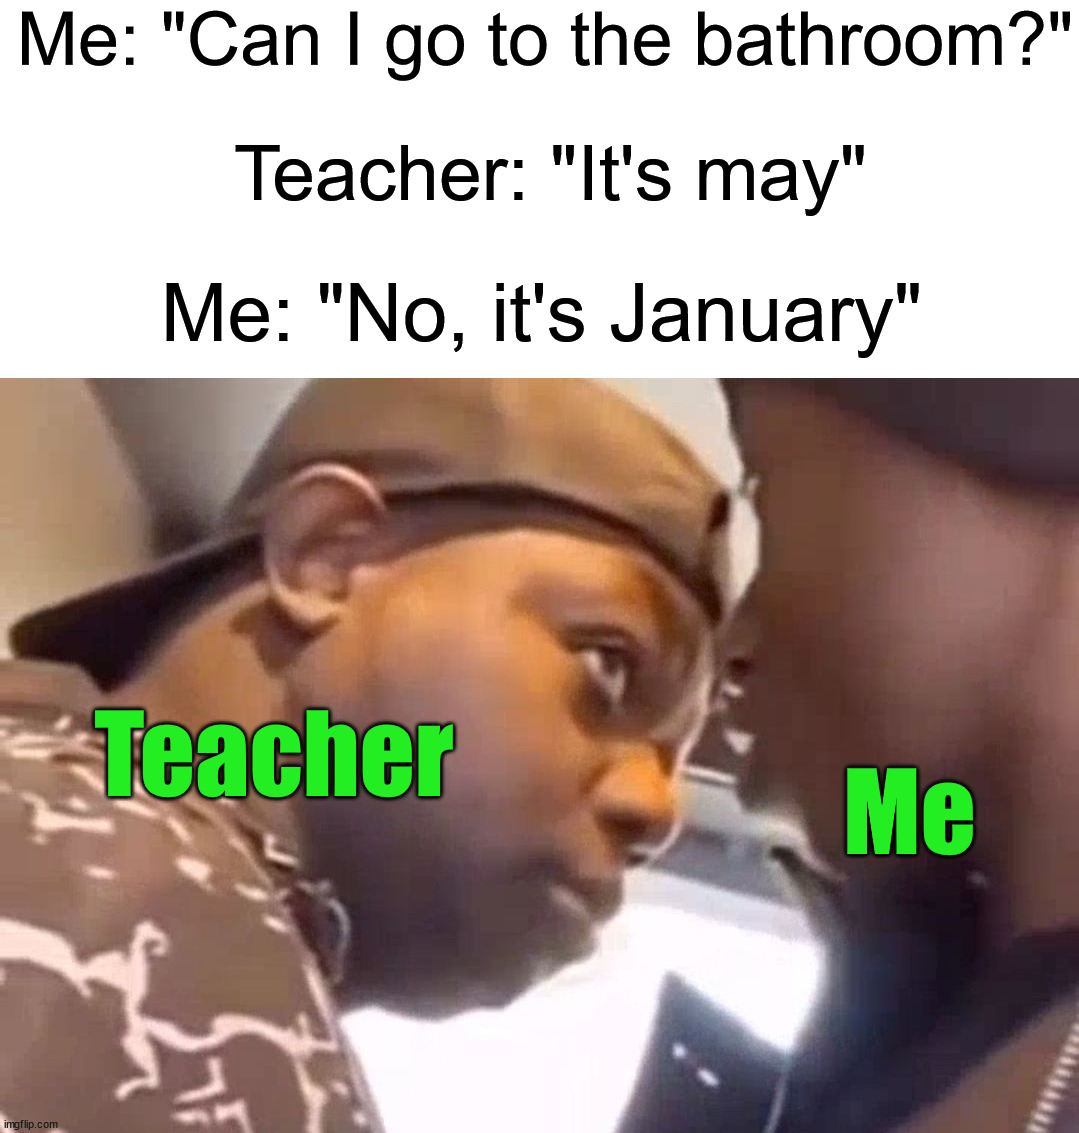 Teachers are crazy lol | Me: "Can I go to the bathroom?"; Teacher: "It's may"; Me: "No, it's January"; Teacher; Me | image tagged in memes,funny,school,relatable memes,bathroom,teacher | made w/ Imgflip meme maker